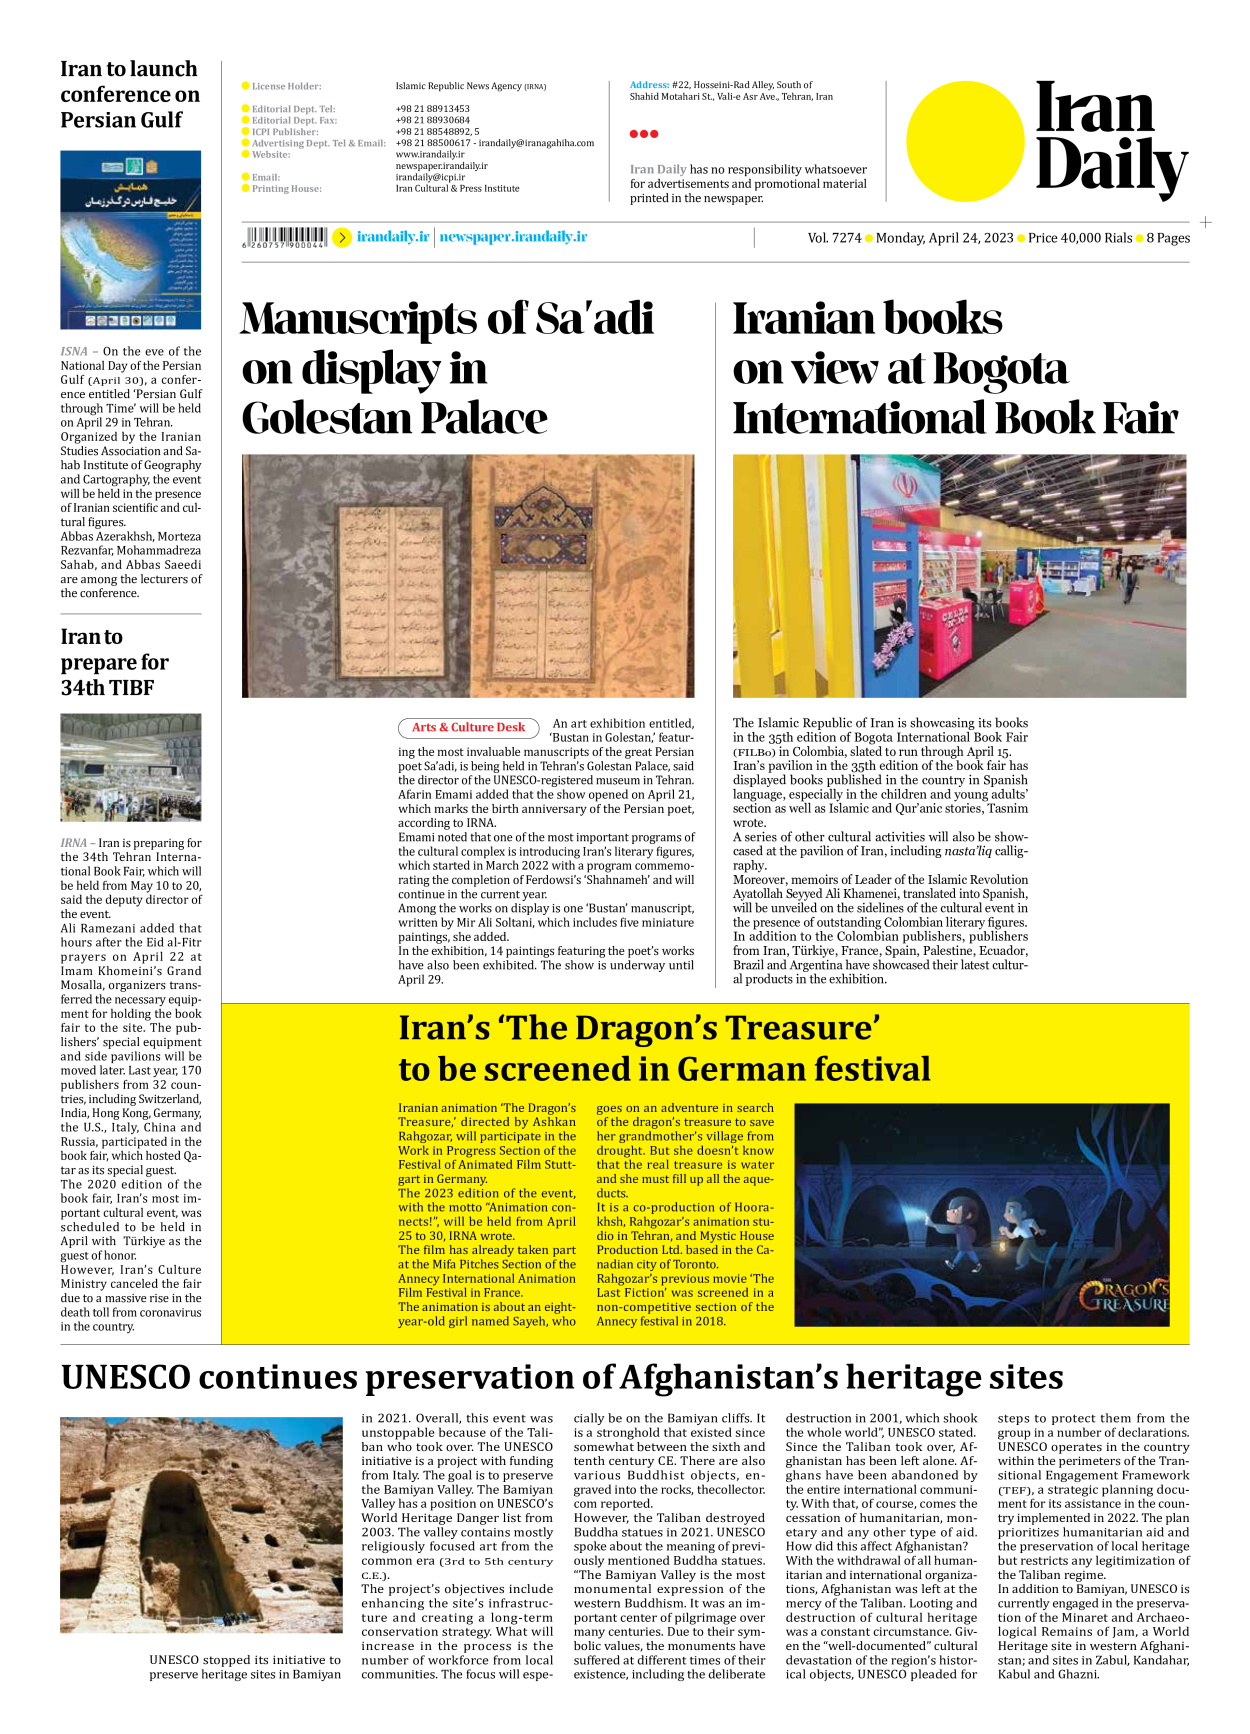 Iran Daily - Number Seven Thousand Two Hundred and Seventy Four - 24 April 2023 - Page 8